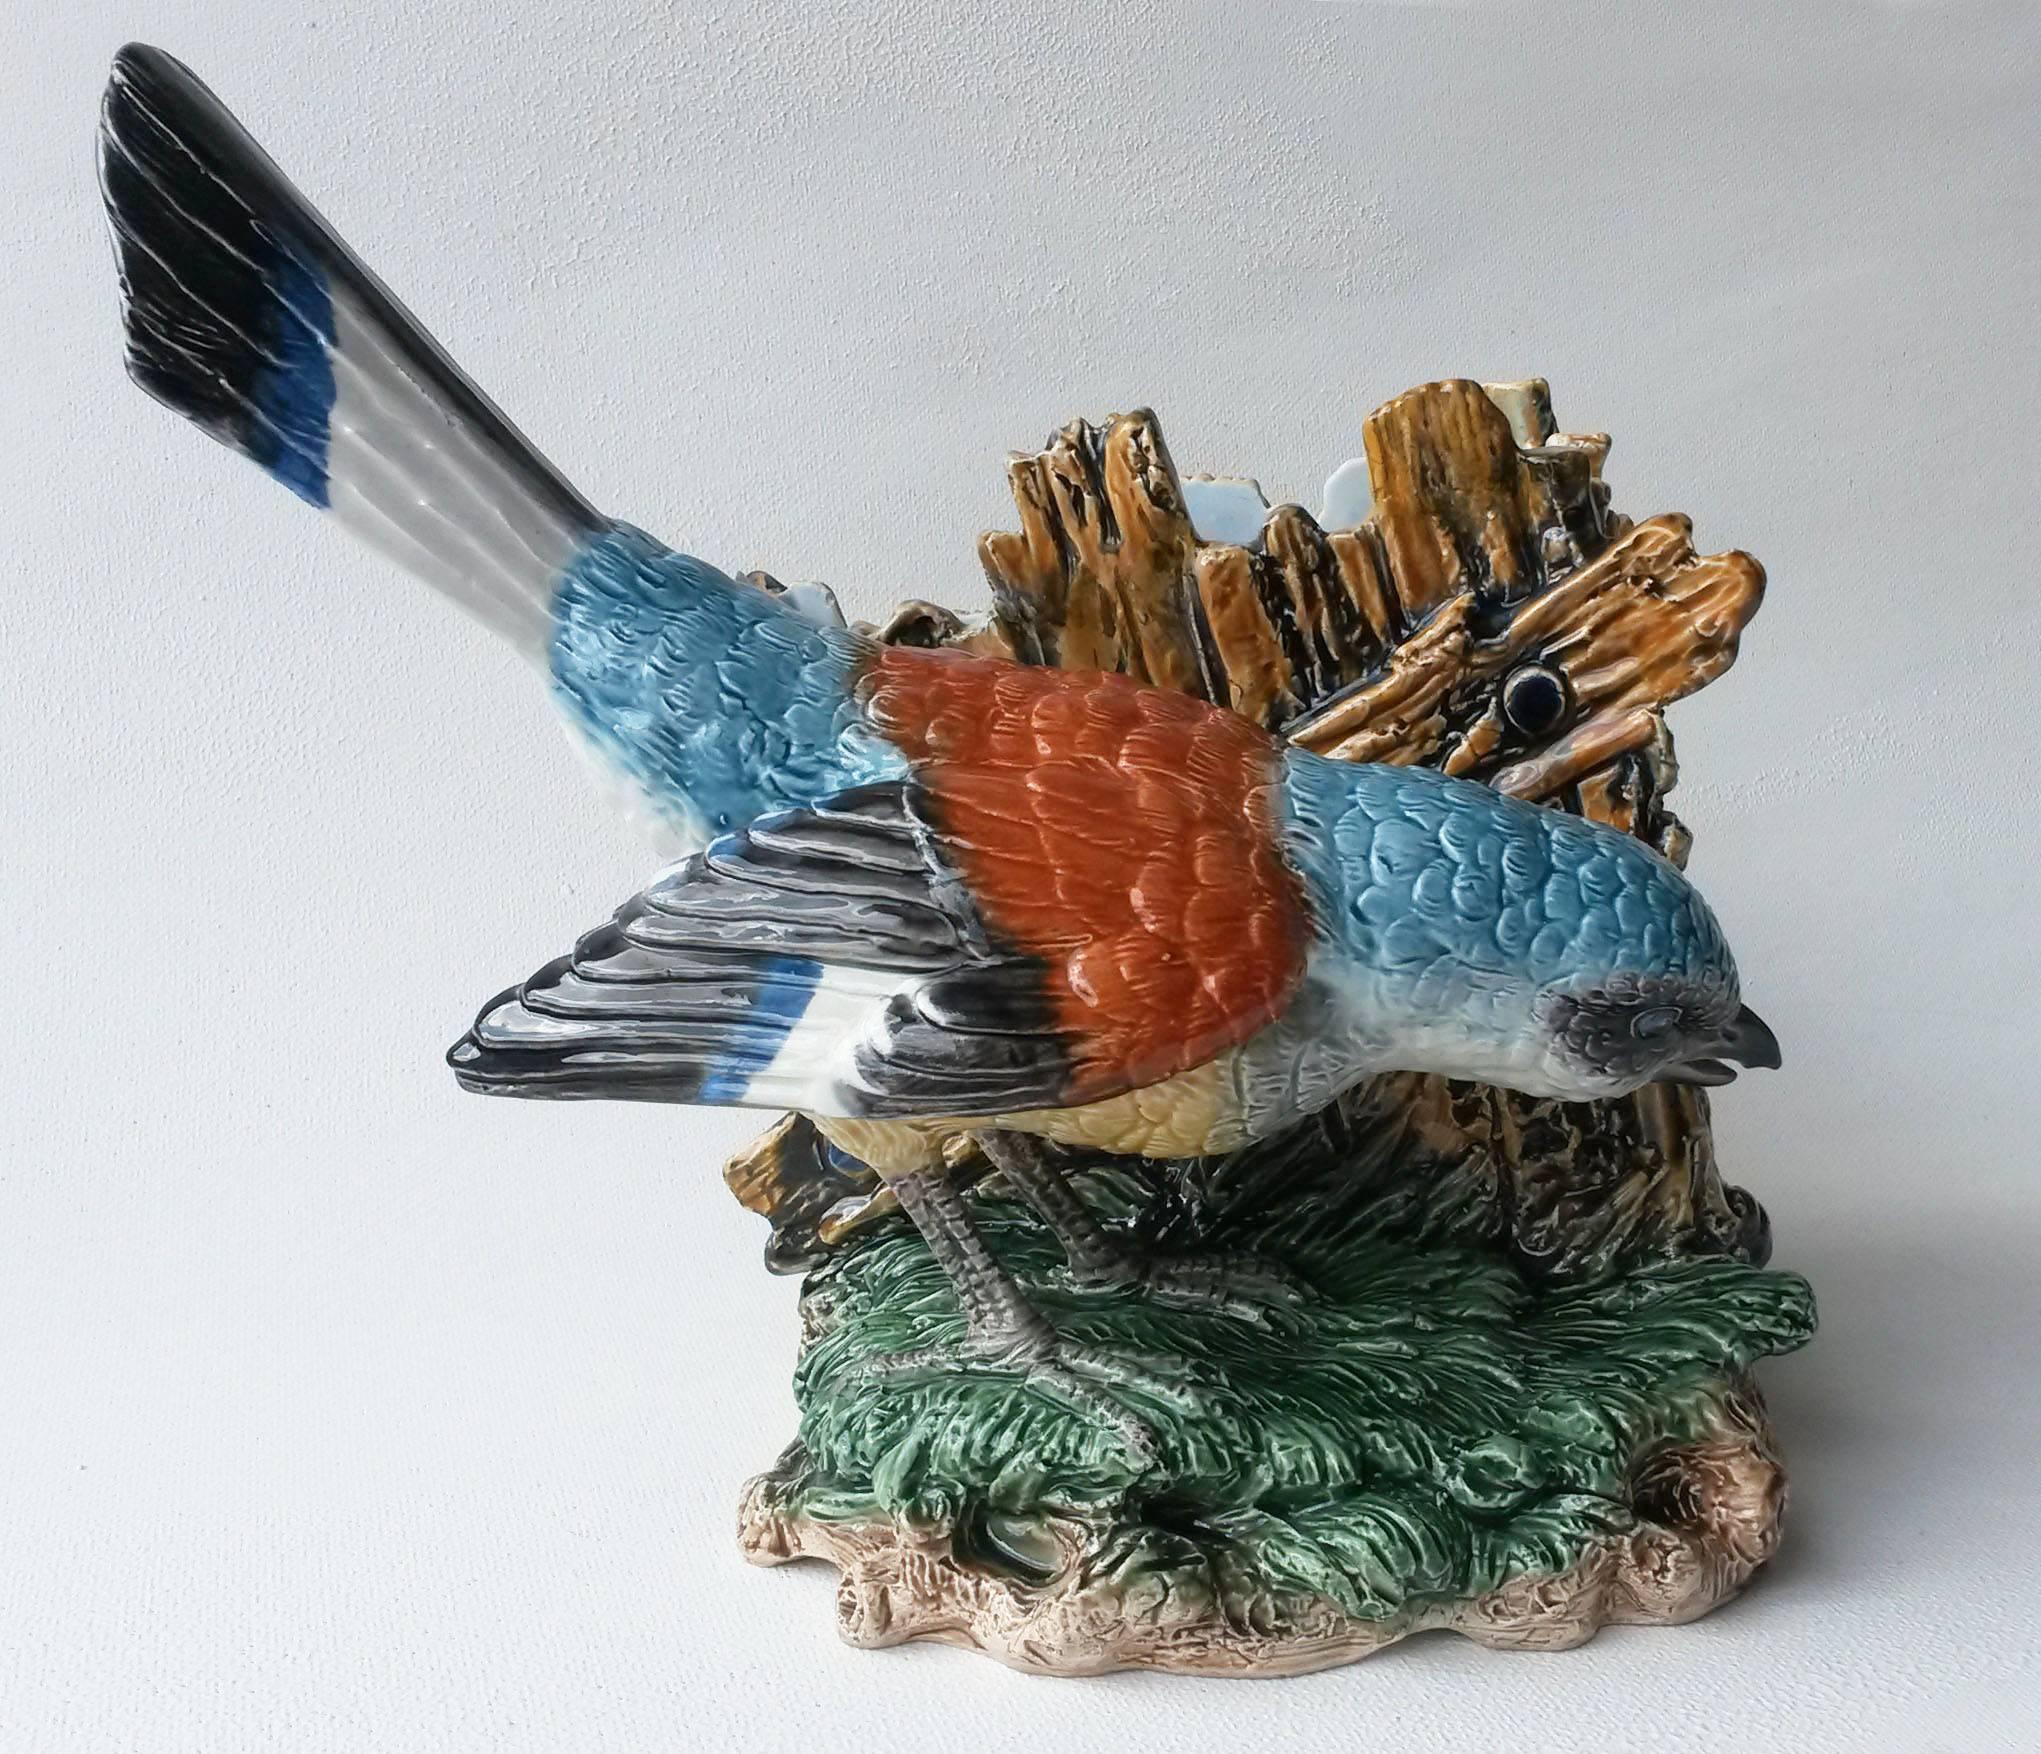 Very rare German Majolica fine bird jardiniere possibly a jay signed Hugo Lonitz.
The jardiniere on the back of the bird is a wood fence with insects.
Excellent quality of details.
Hugo Lonitz is known for his remarkable skill to reproduce the